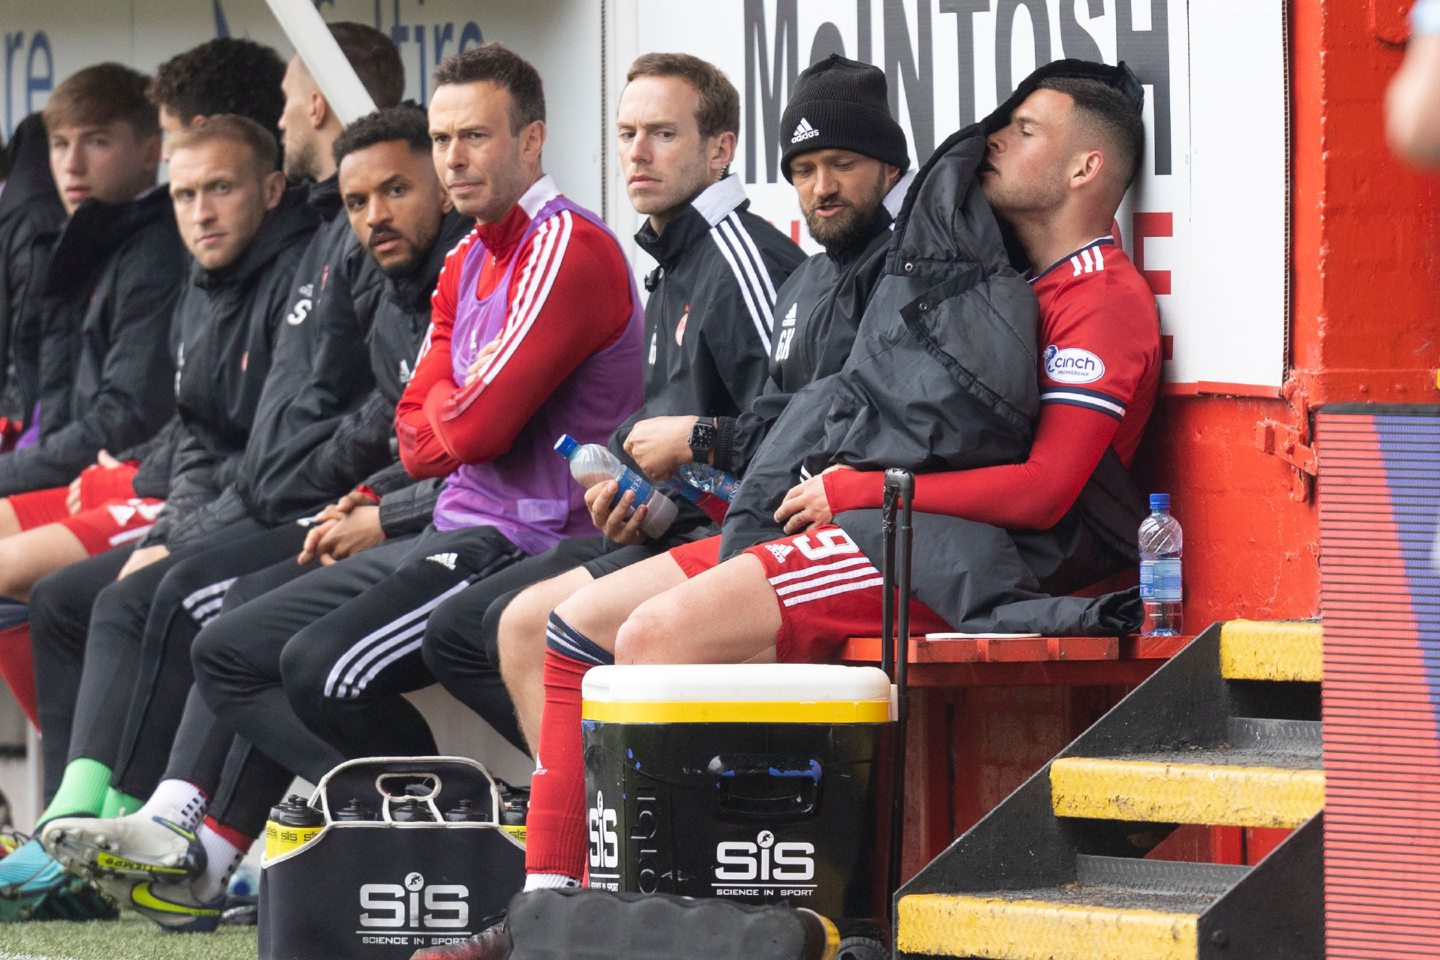 Aberdeen's Christian Ramirez is disappointed at being substituted against Dundee.